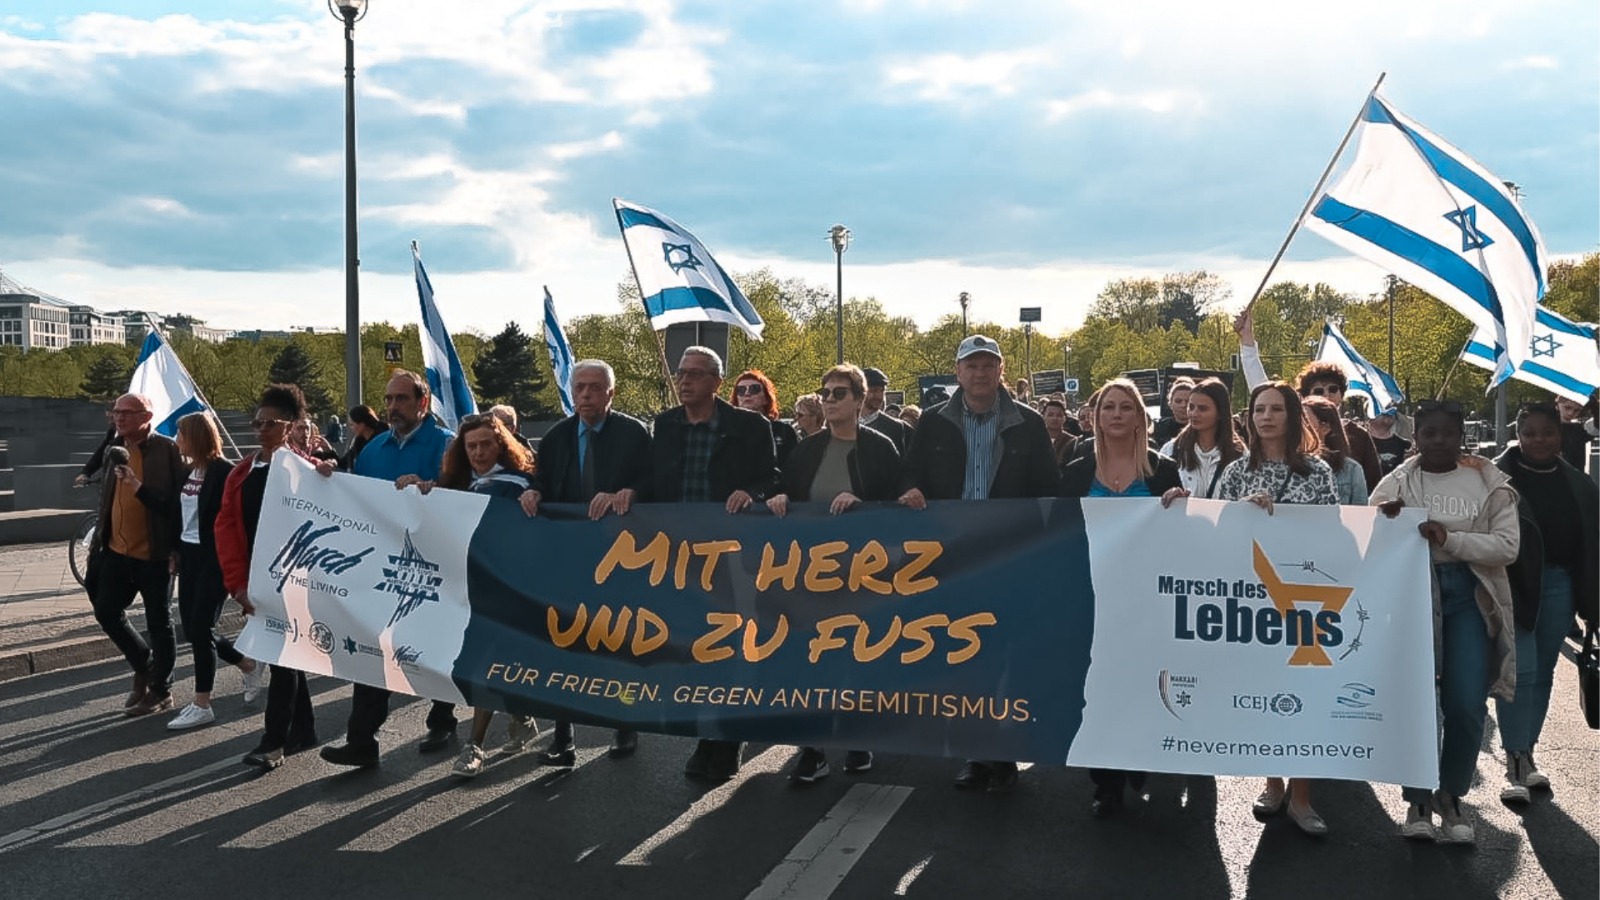 March of Life berlin Germany against antisemitism